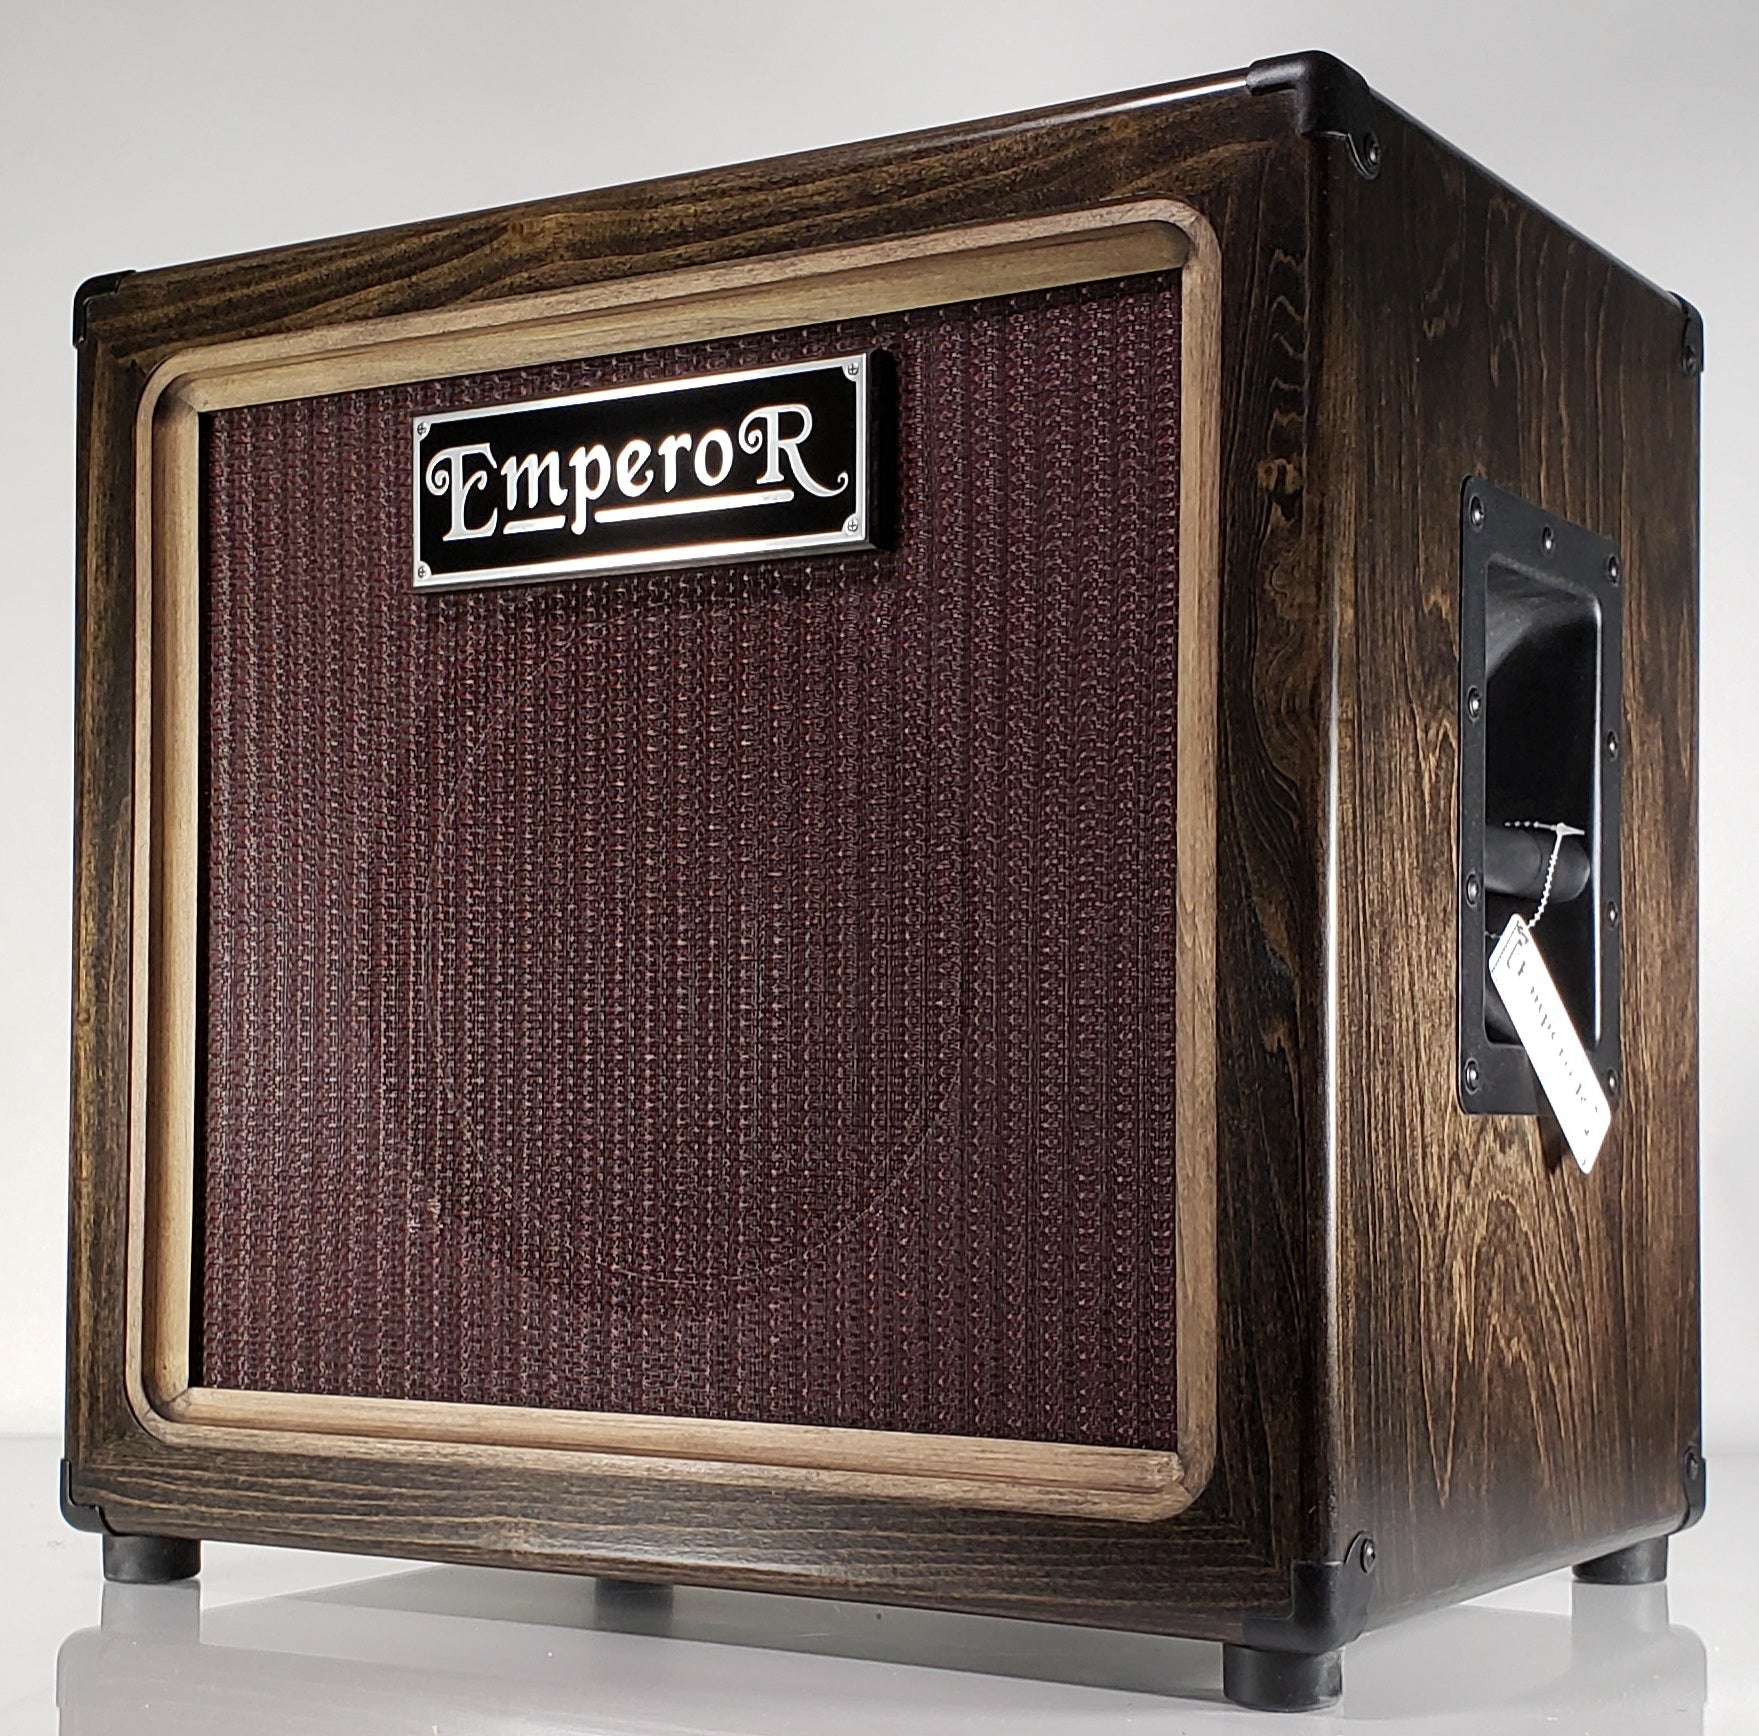 a 1x12 guitar speaker cabinet with a dark colored stain